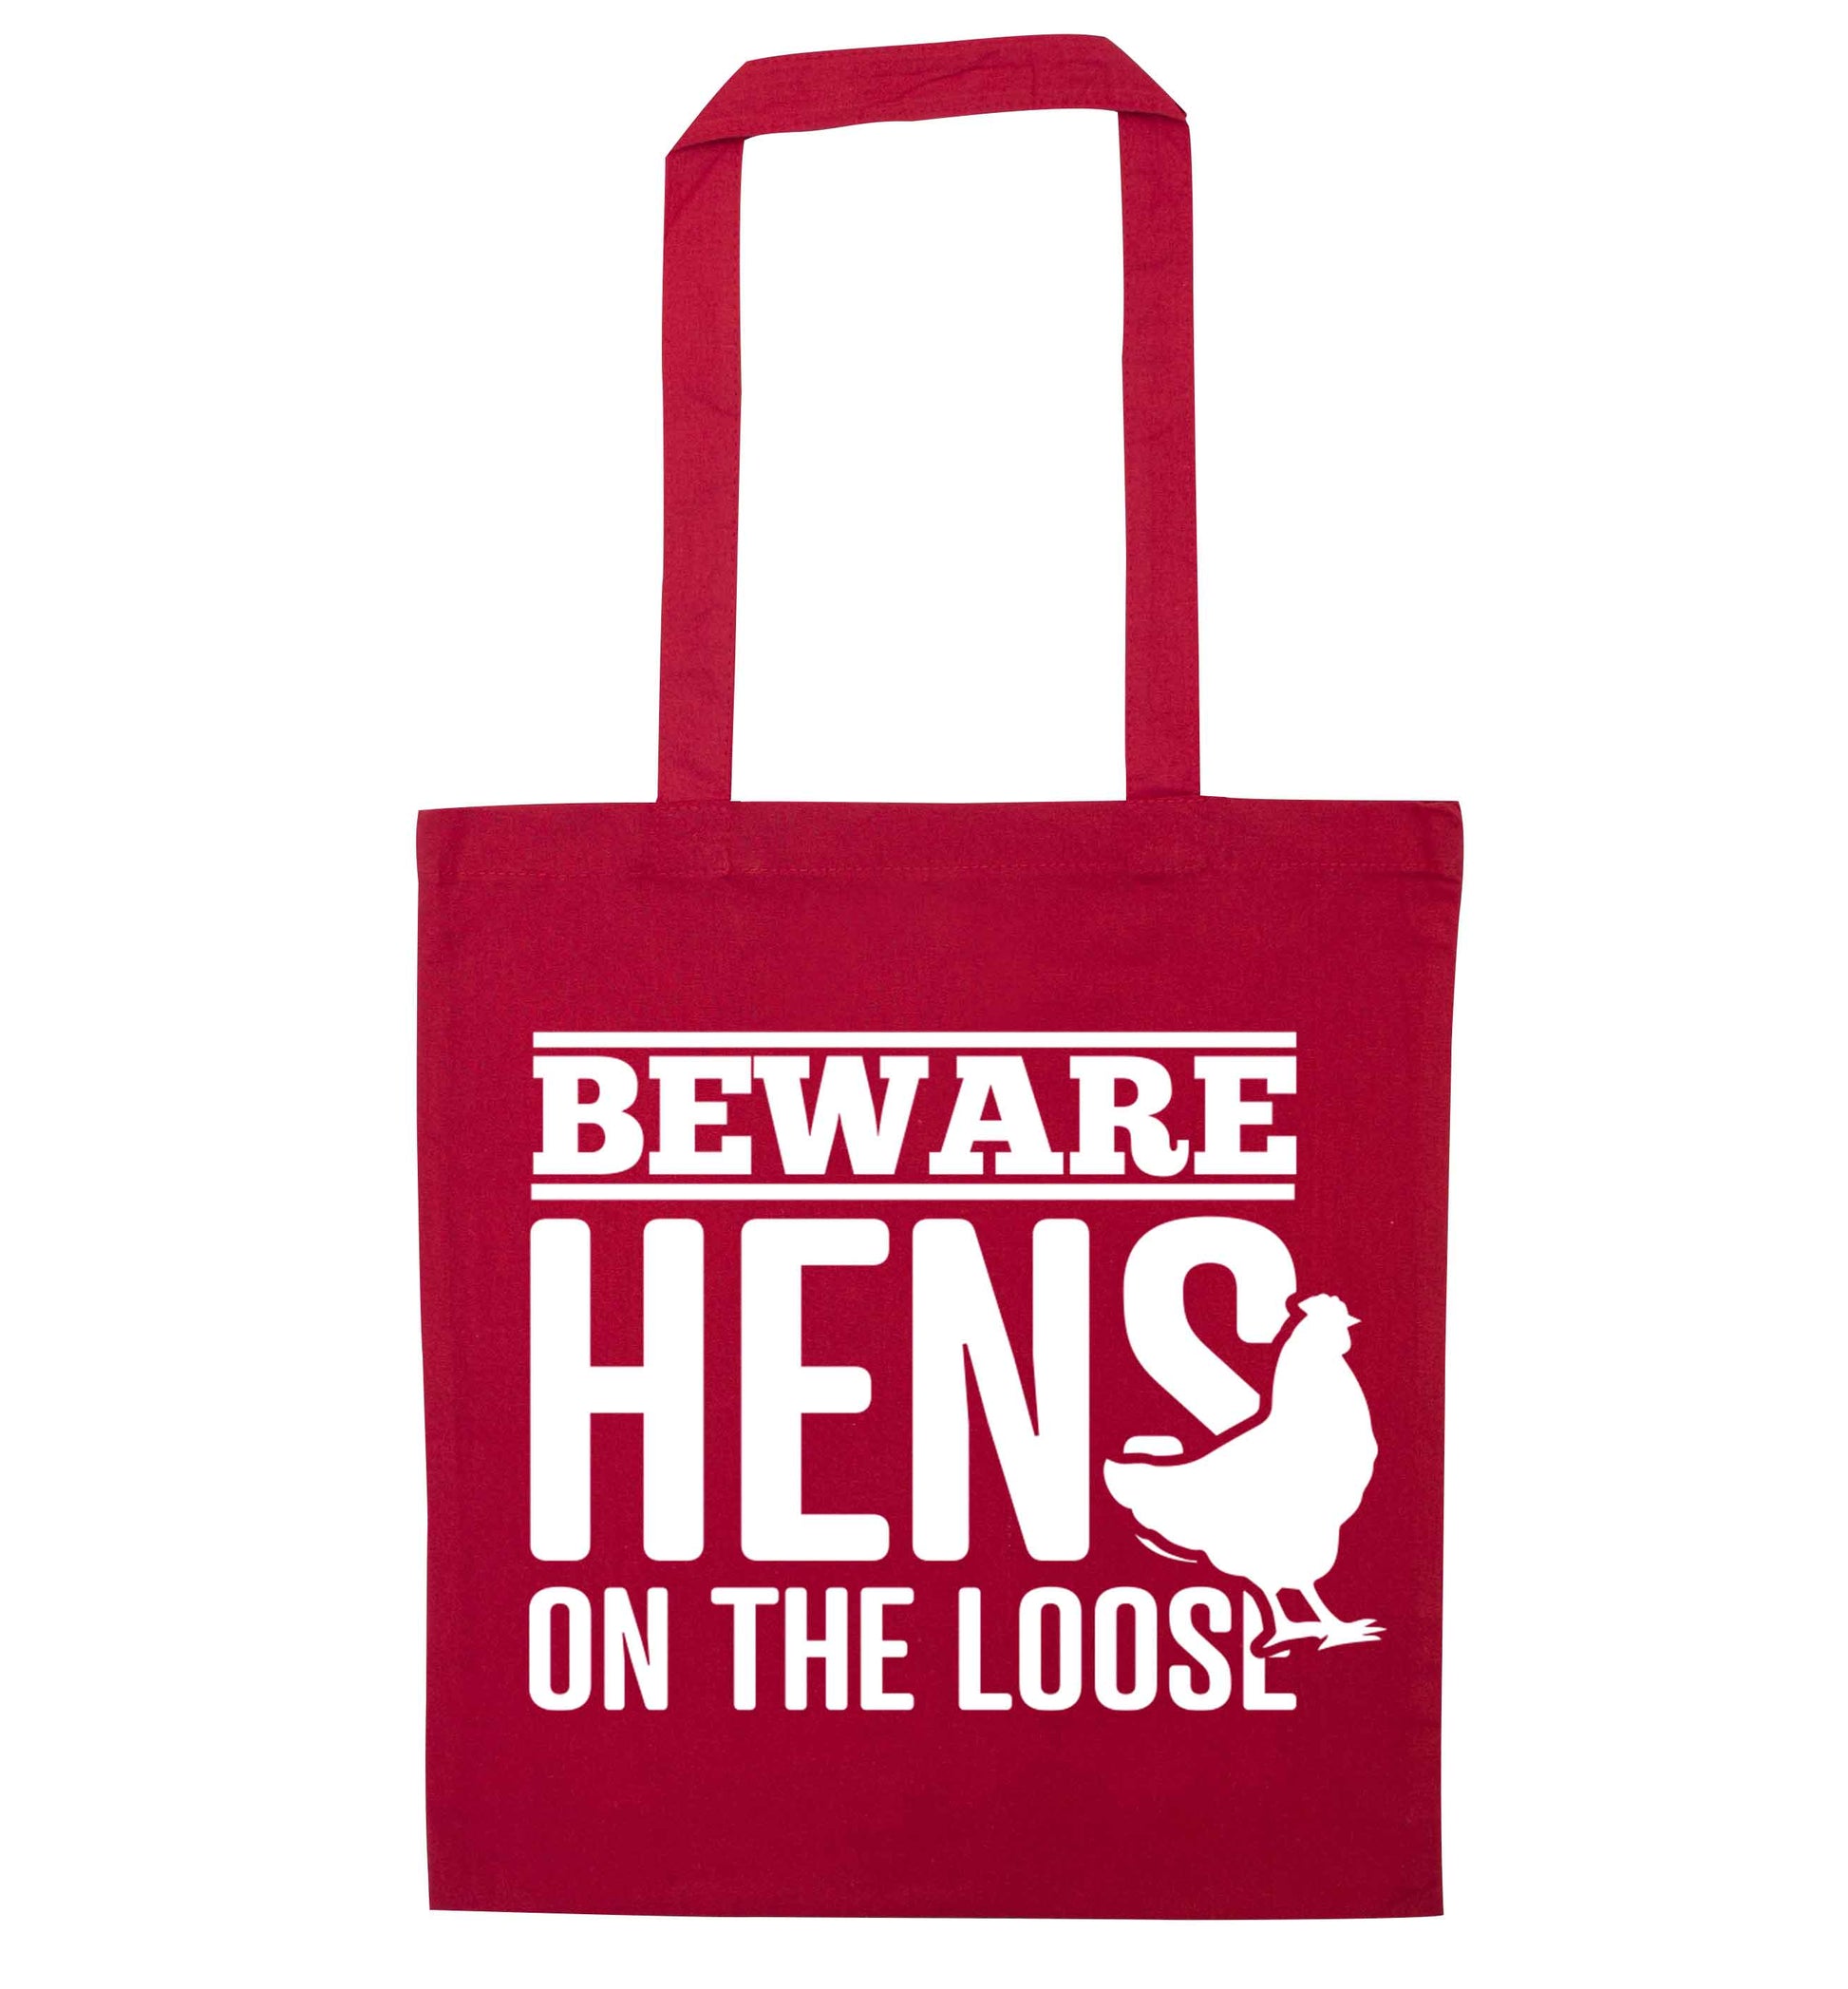 Beware hens on the loose red tote bag